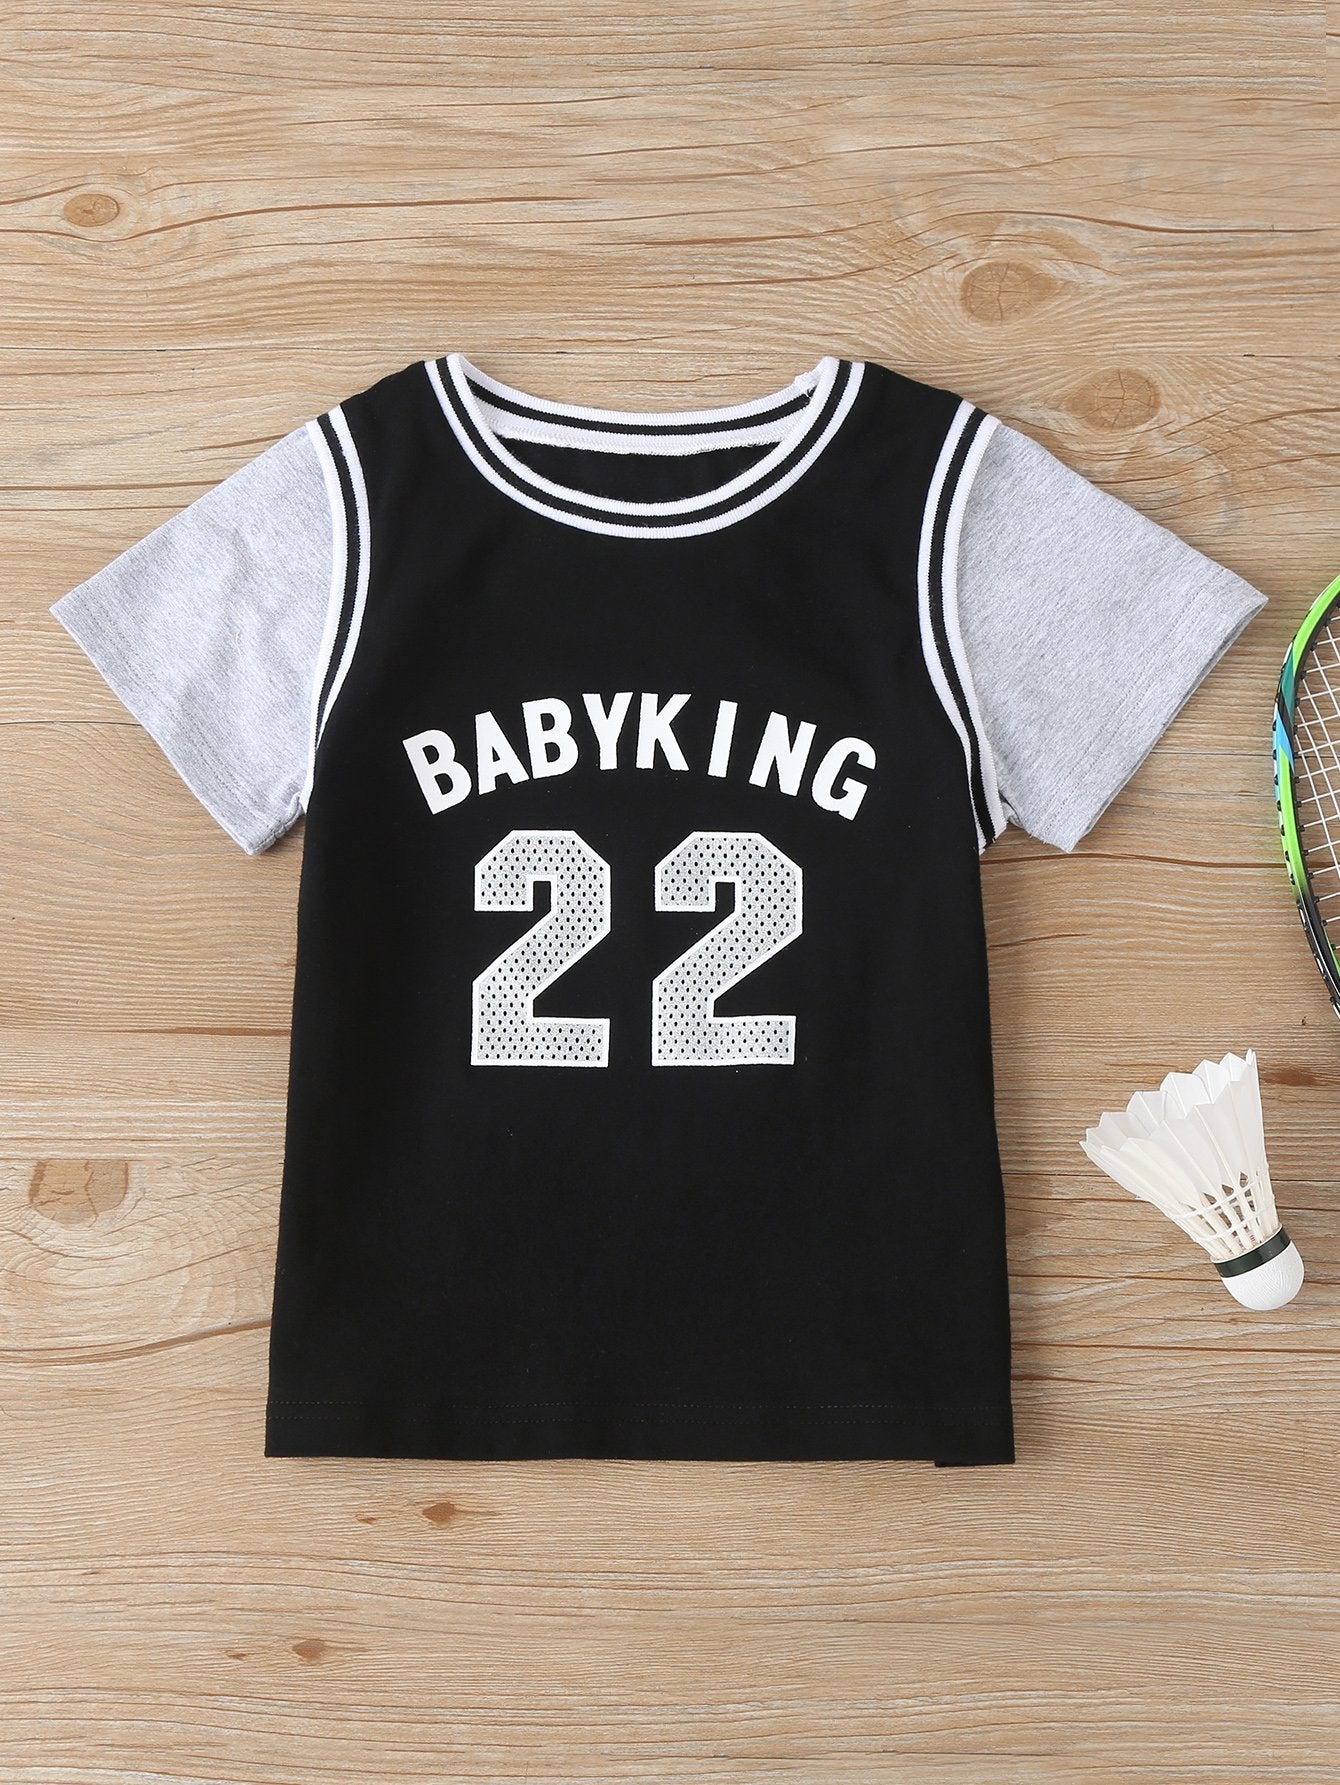 Boys Letter Printed Short Sleeve Color Contrast Top & Shorts wholesale boys clothing